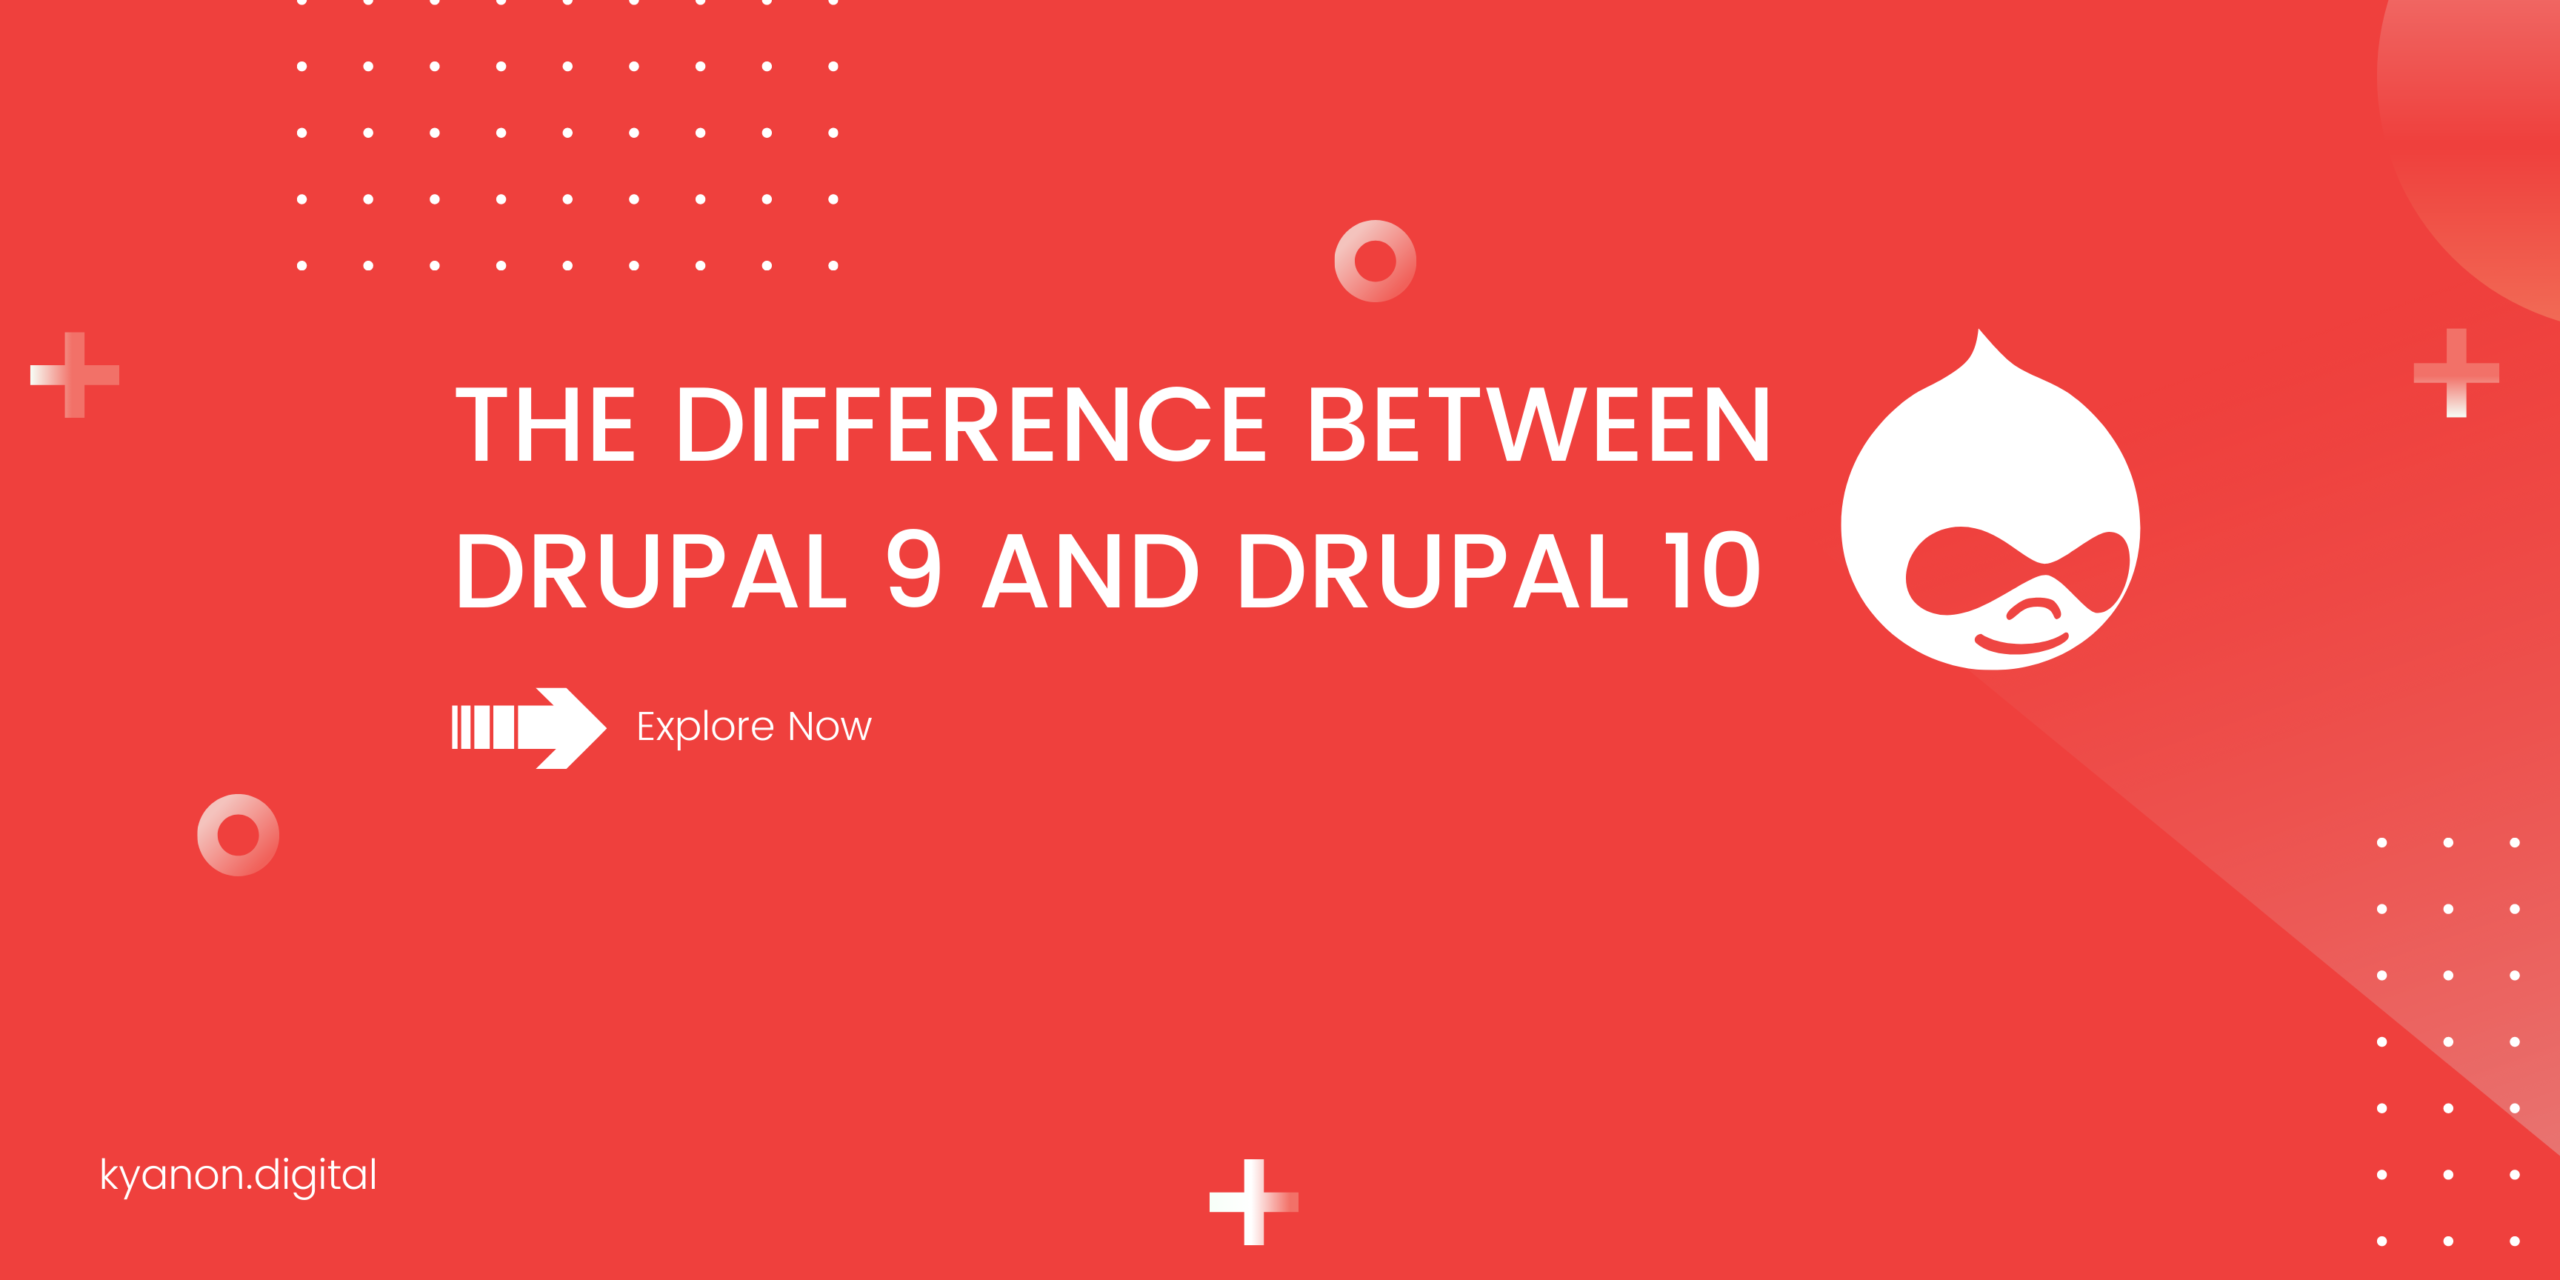 The Difference Between Drupal 9 And Drupal 10